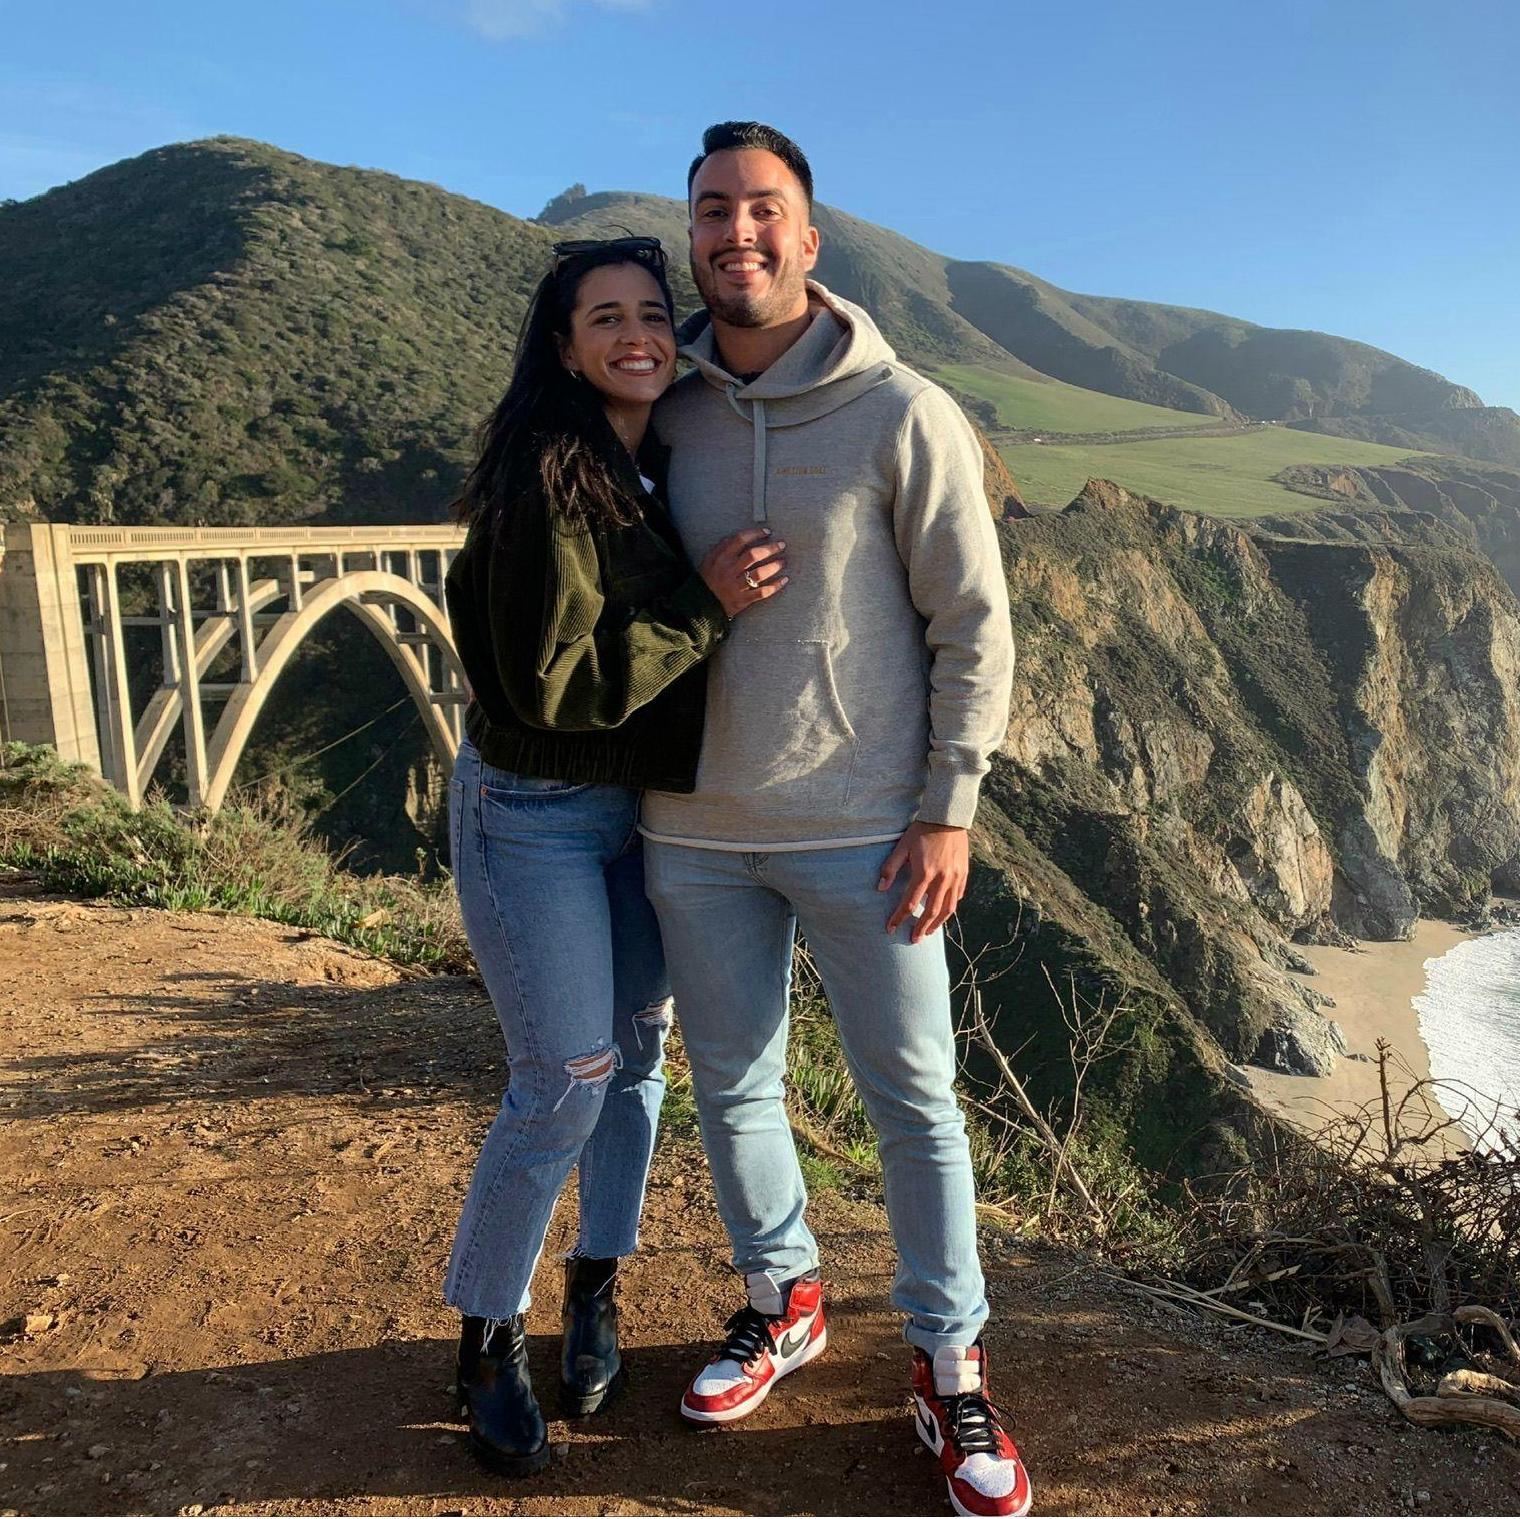 Valentine's Day 2021 - Sam & Liv took a road trip up the coast, all the way to Big Sur.